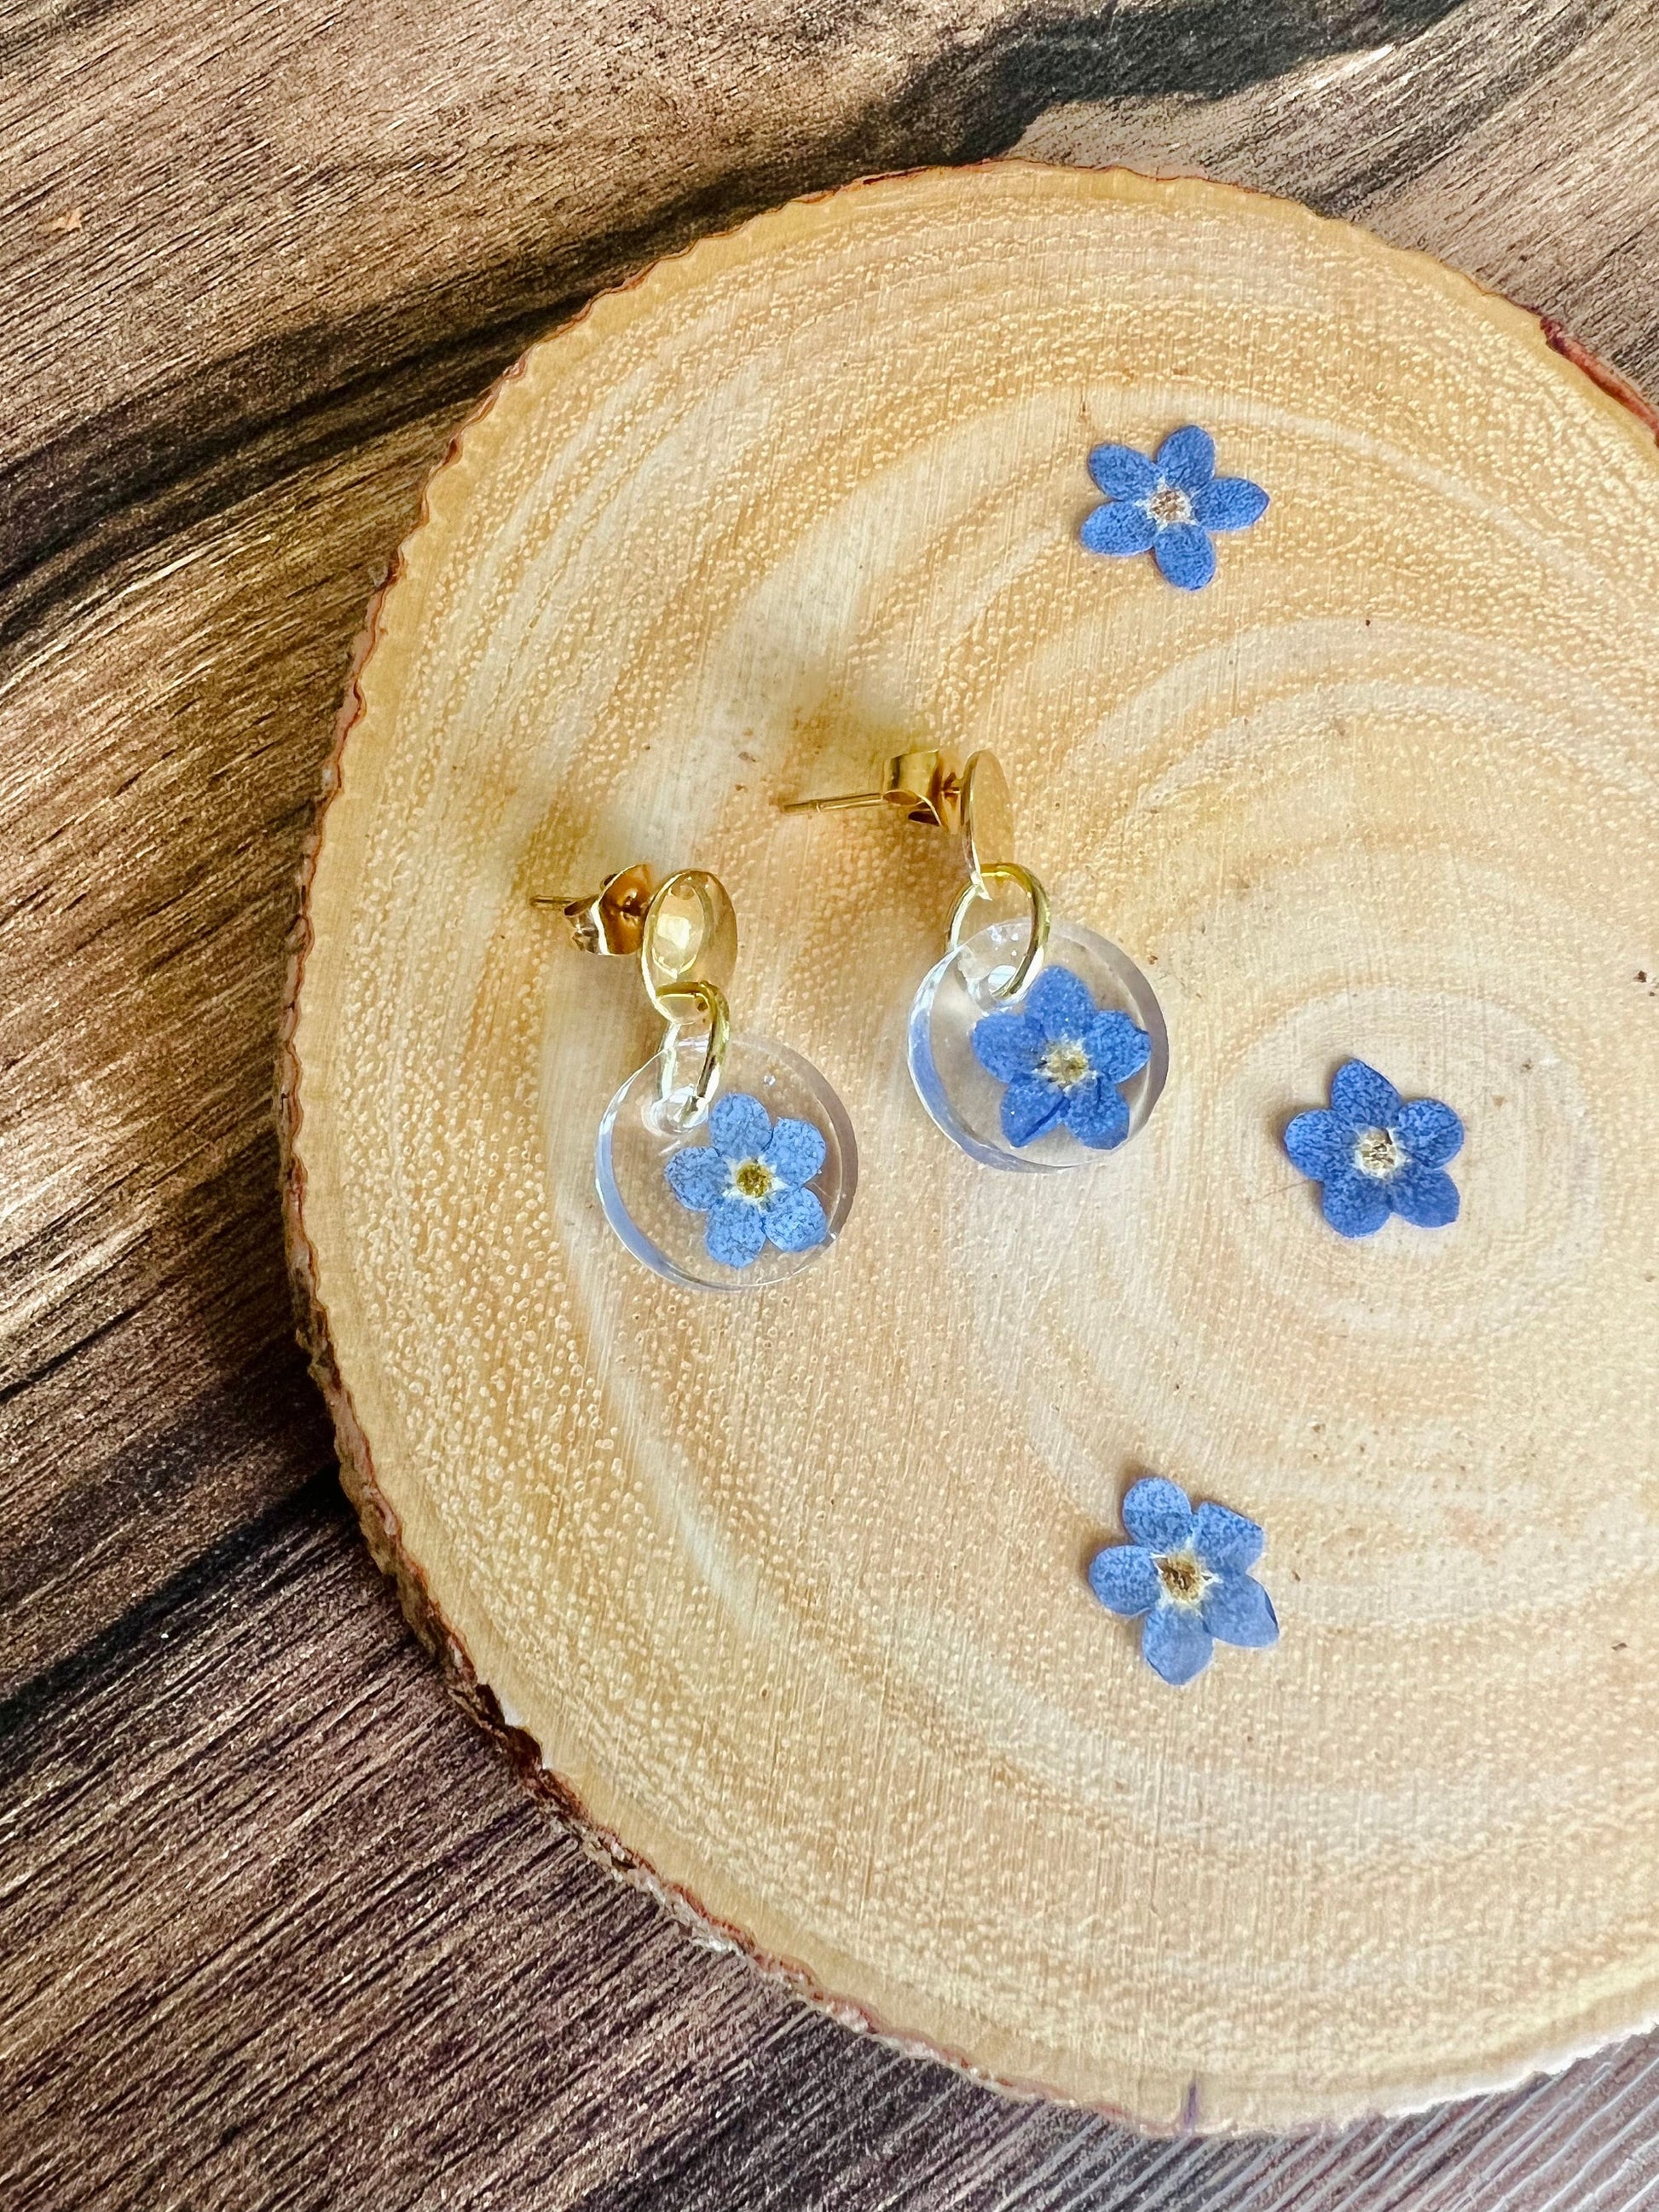 Real Pressed Flower Forget Me Not Earrings, Forget-me-not, Dried, Blue, Handmade, Jewelry, Nature, Mother, Bridesmaid, Wildflower, Gift